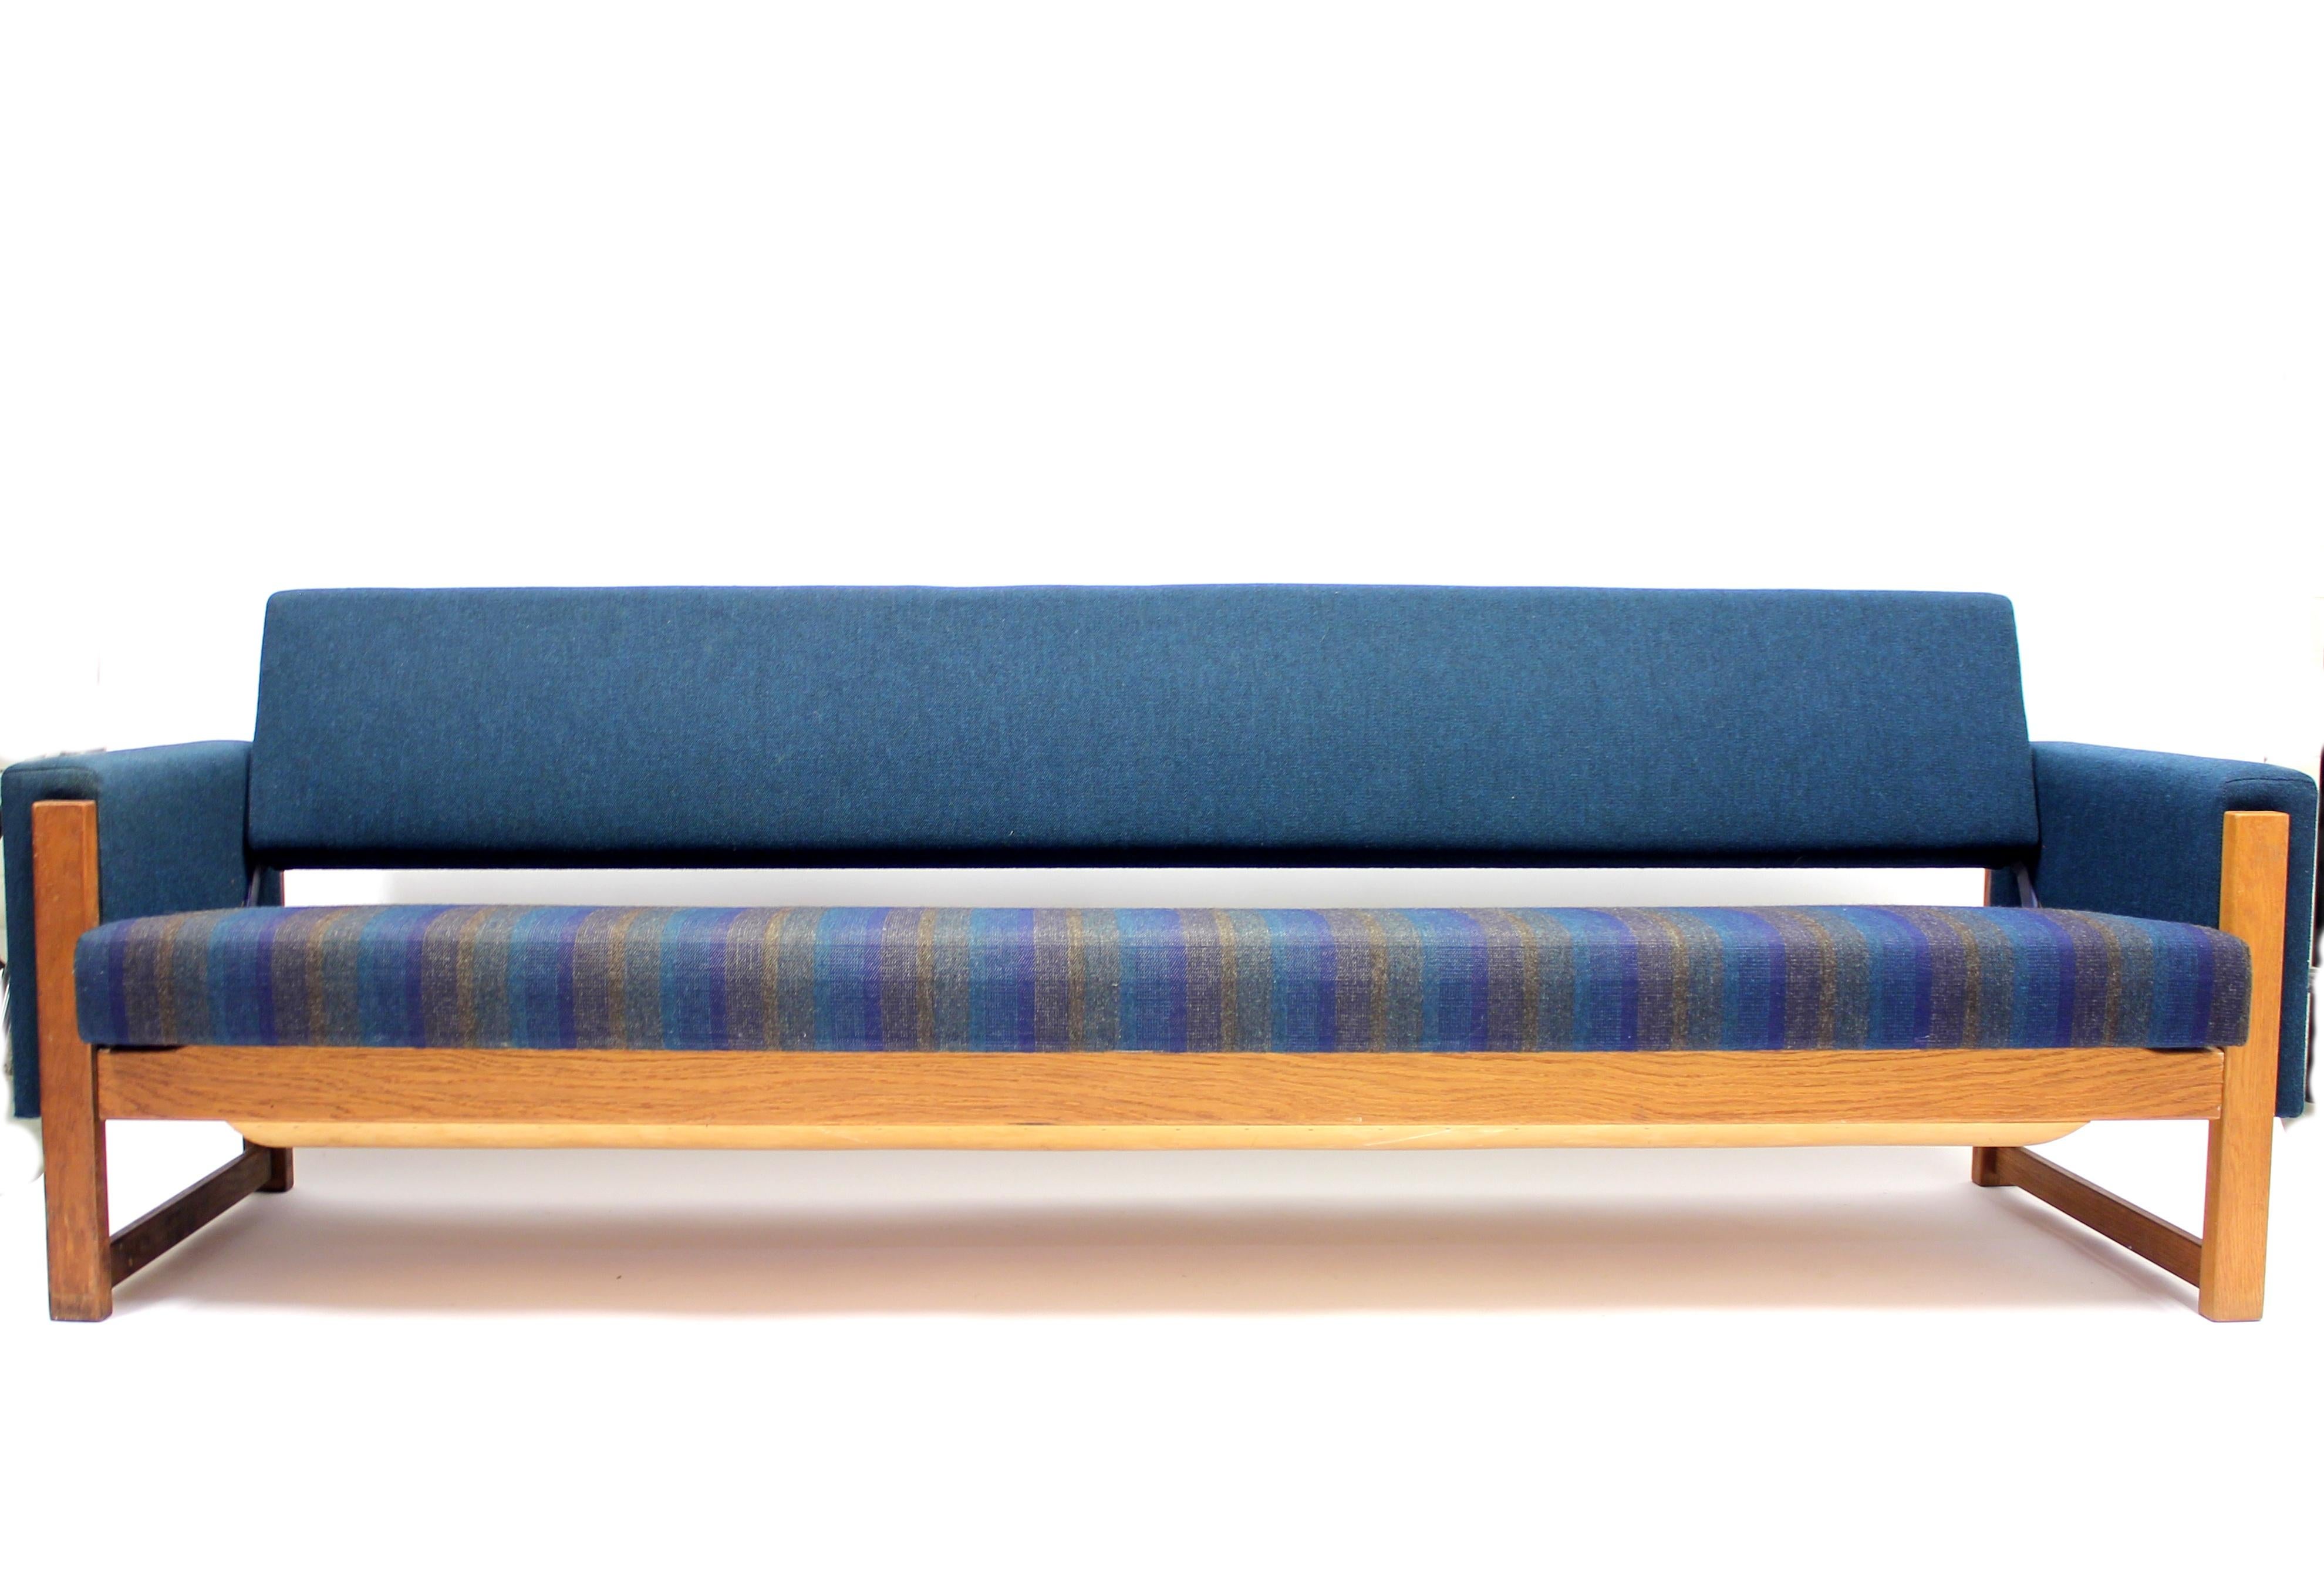 Sofa bed designed by Yngve Ekström in the 1960 for Broby Industri AB. The sofa is all original with the original blue fabric in a remarkable good condition. Some light ware on wooden parts. It´s very easy to manage. You just need one singel move to